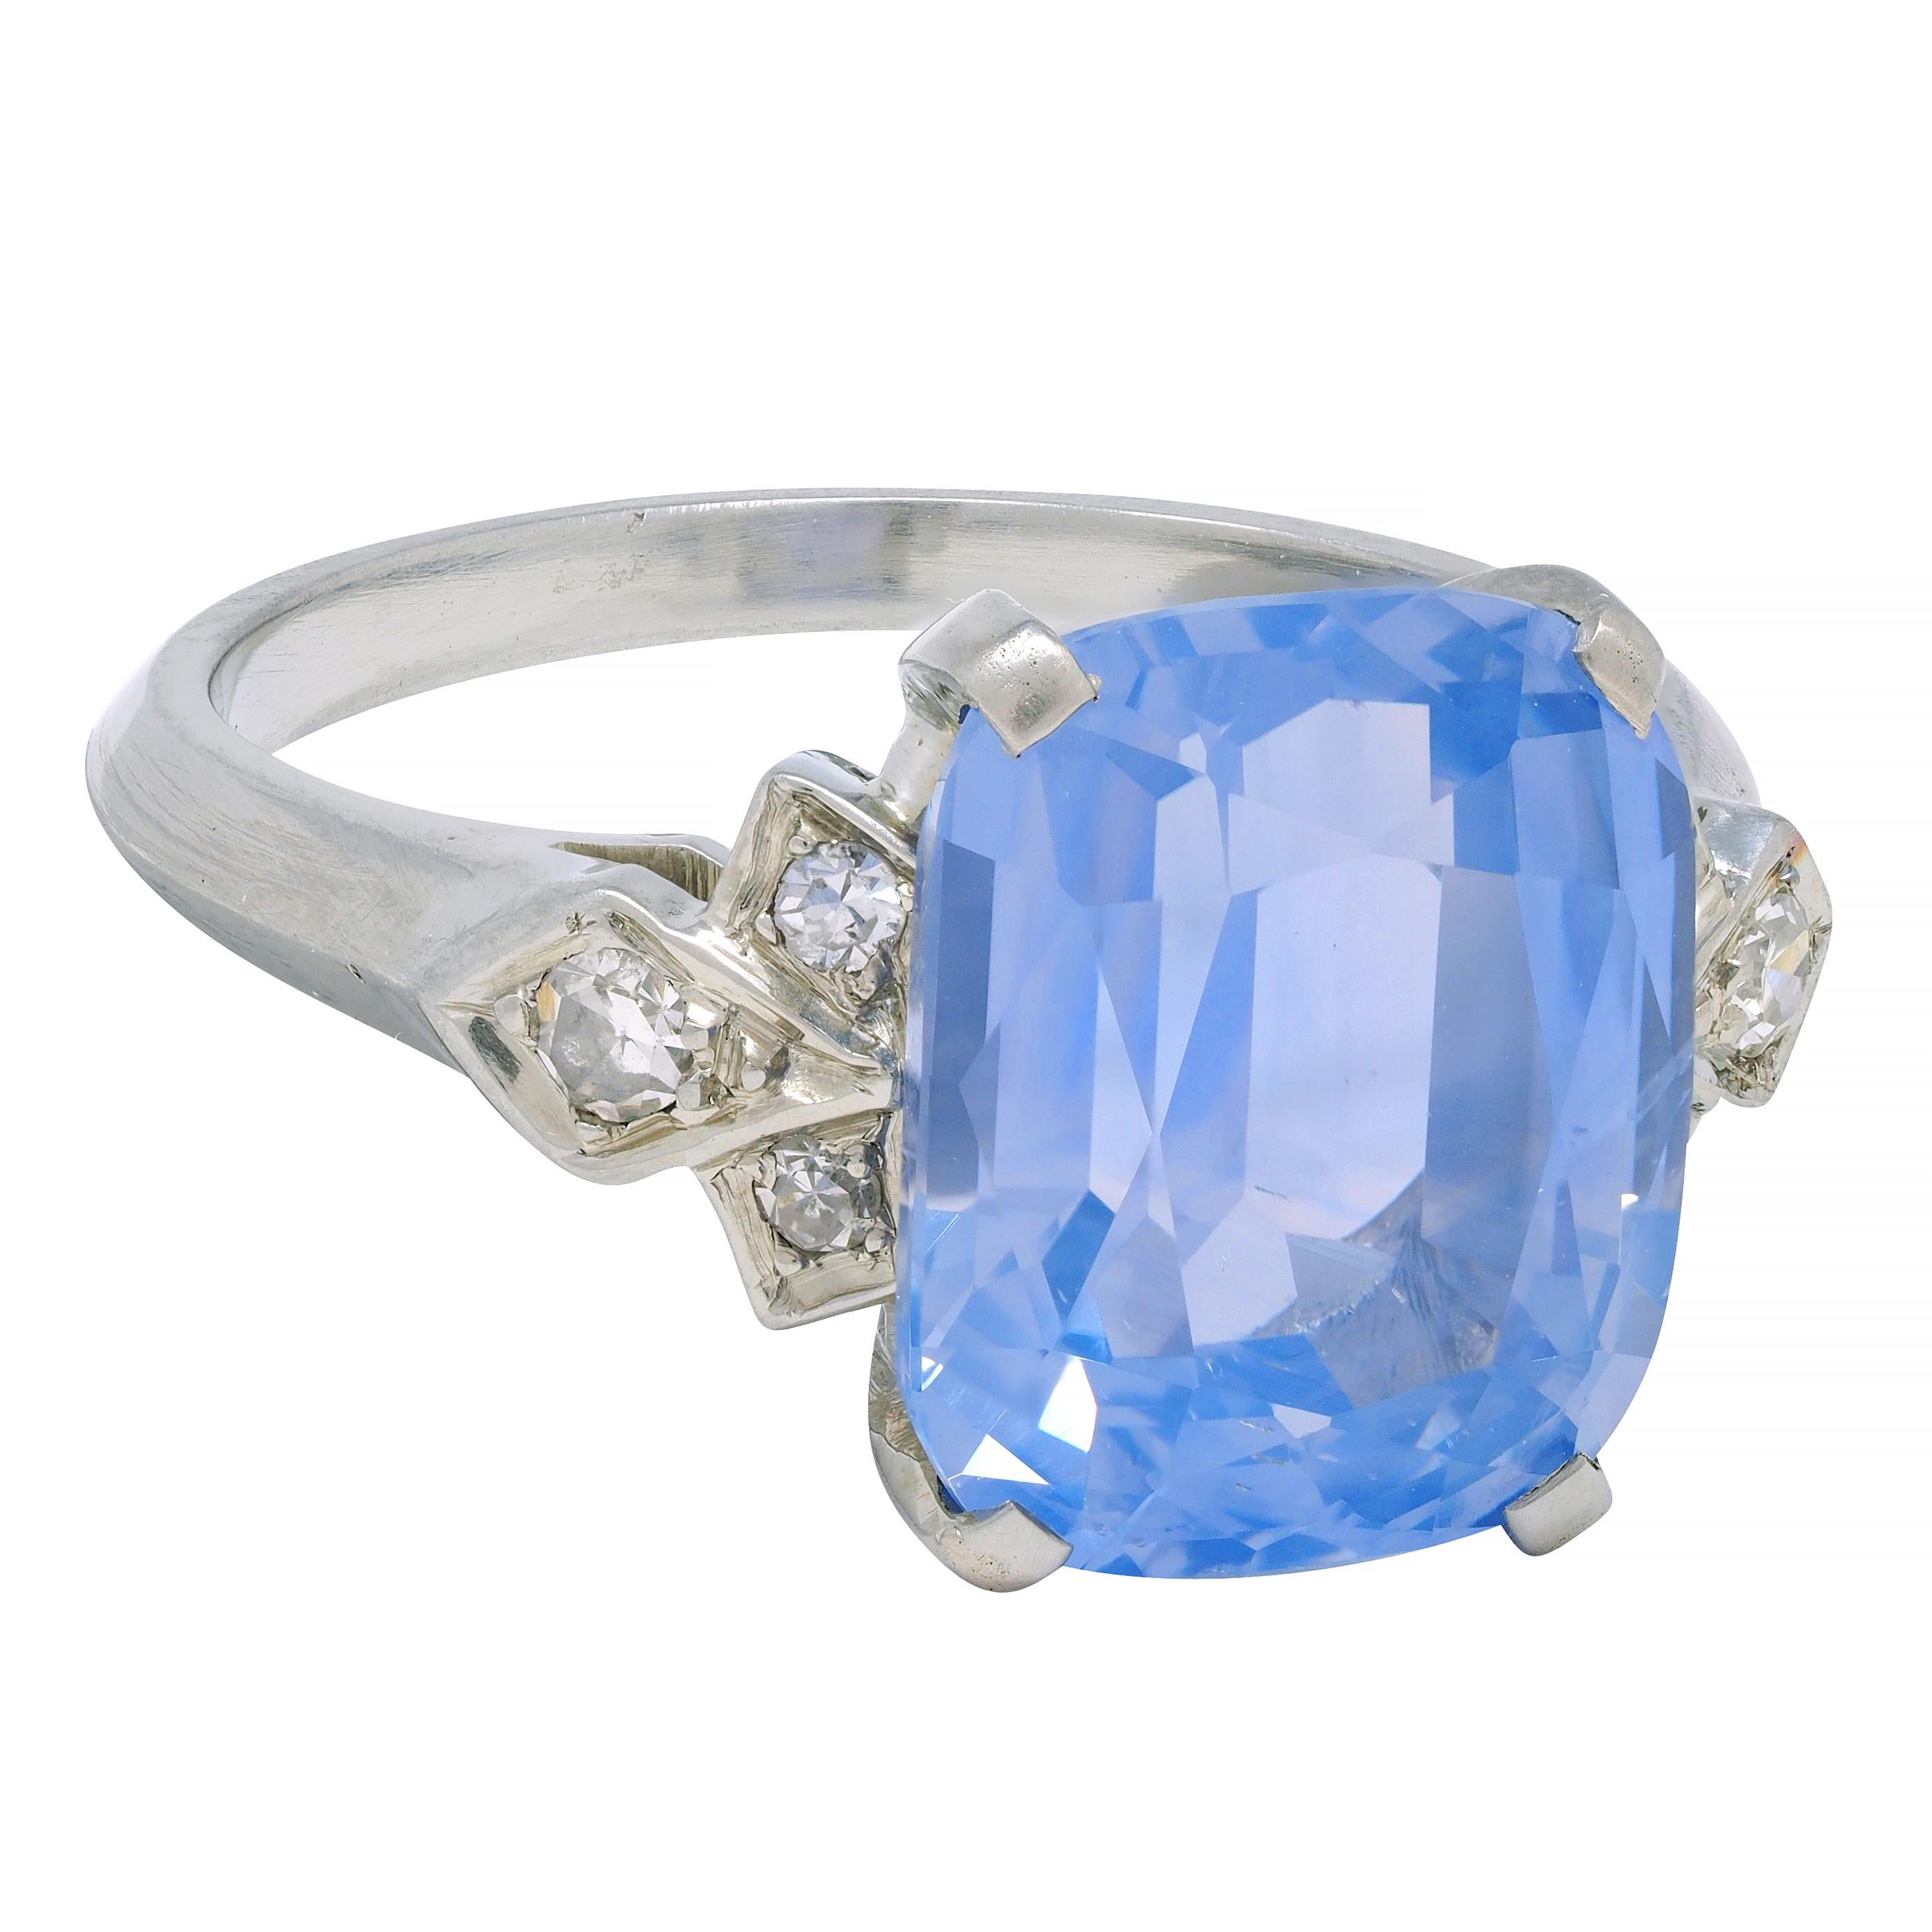 Centering a cushion cut sapphire weighing 6.44 carats - transparent light blue in color
Natural Ceylon in origin with no indications of heat treatment 
Prong set in basket and flanked by single cut diamonds 
Weighing approximately 0.16 carat total